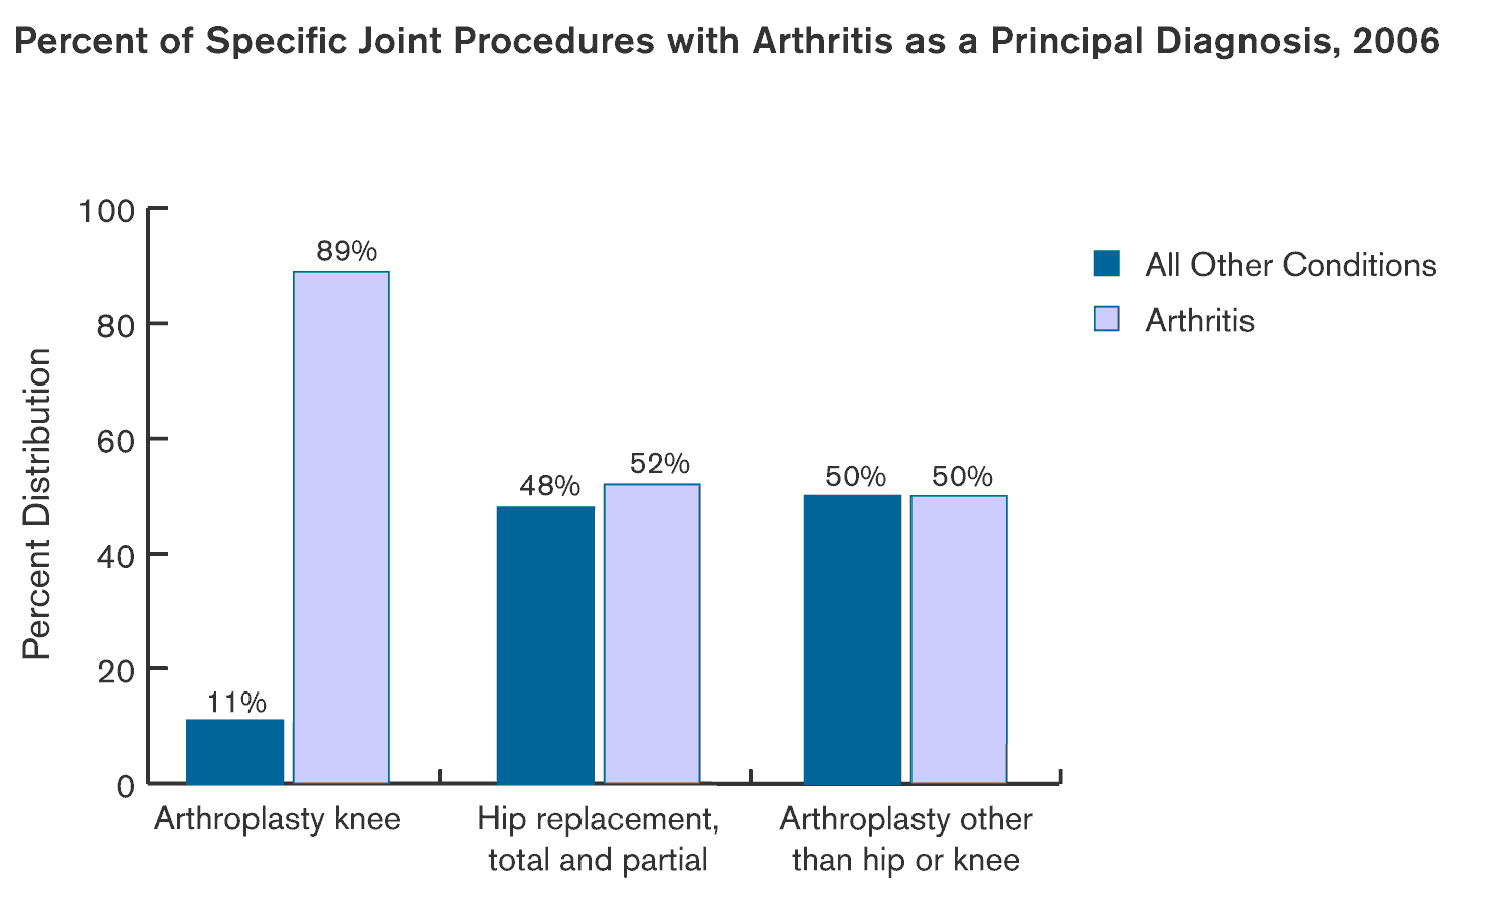 Exhibit 5.5. Chart showing Percent of Specific Joint Procedures with Arthritis as a Principal Diagnosis, 2006